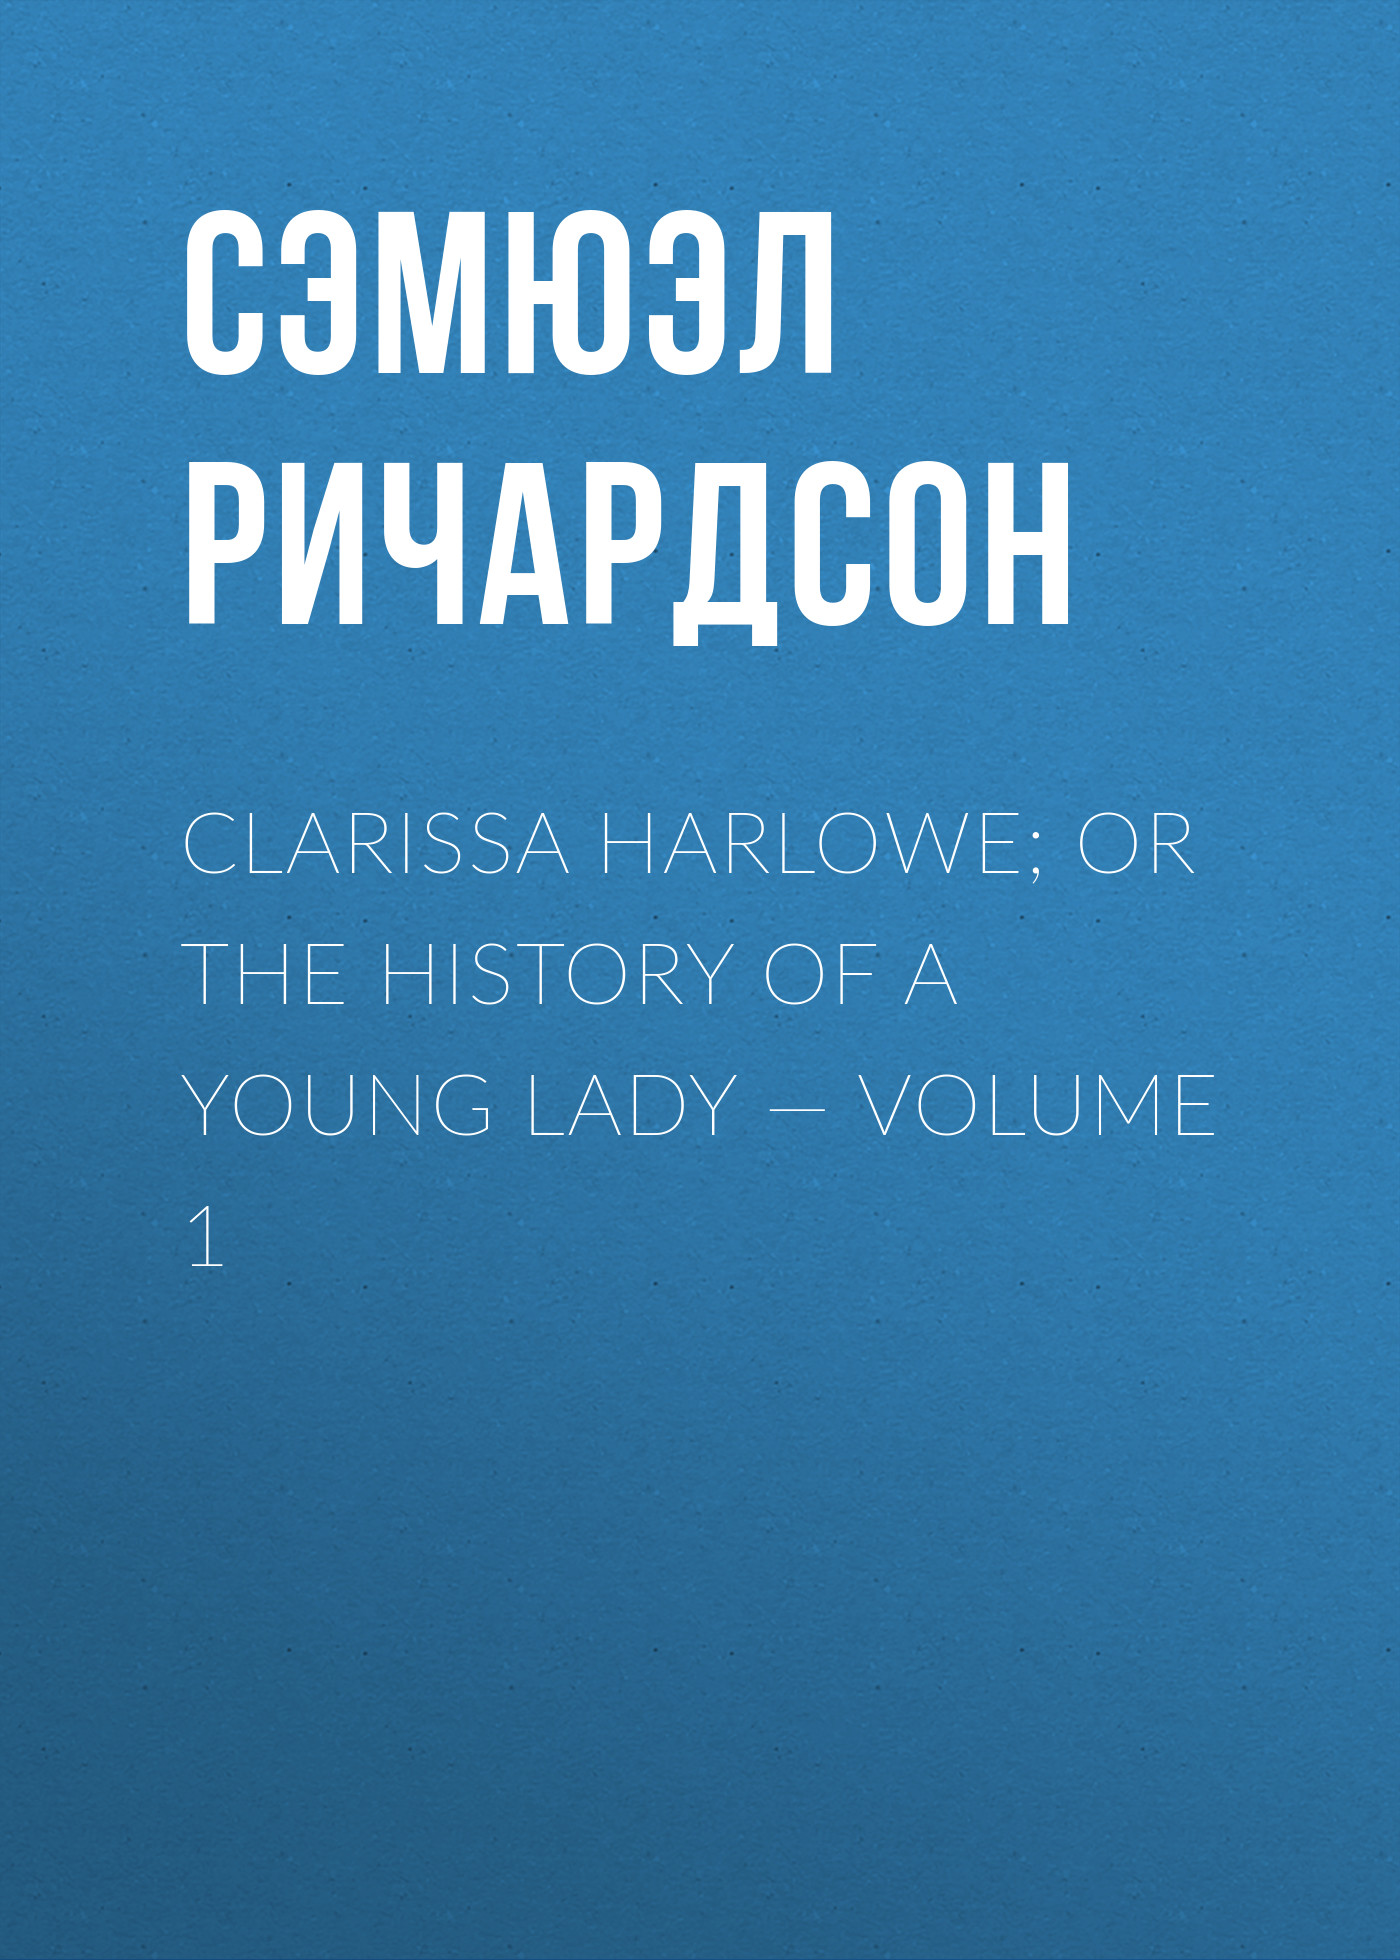 Clarissa Harlowe; or the history of a young lady— Volume 1